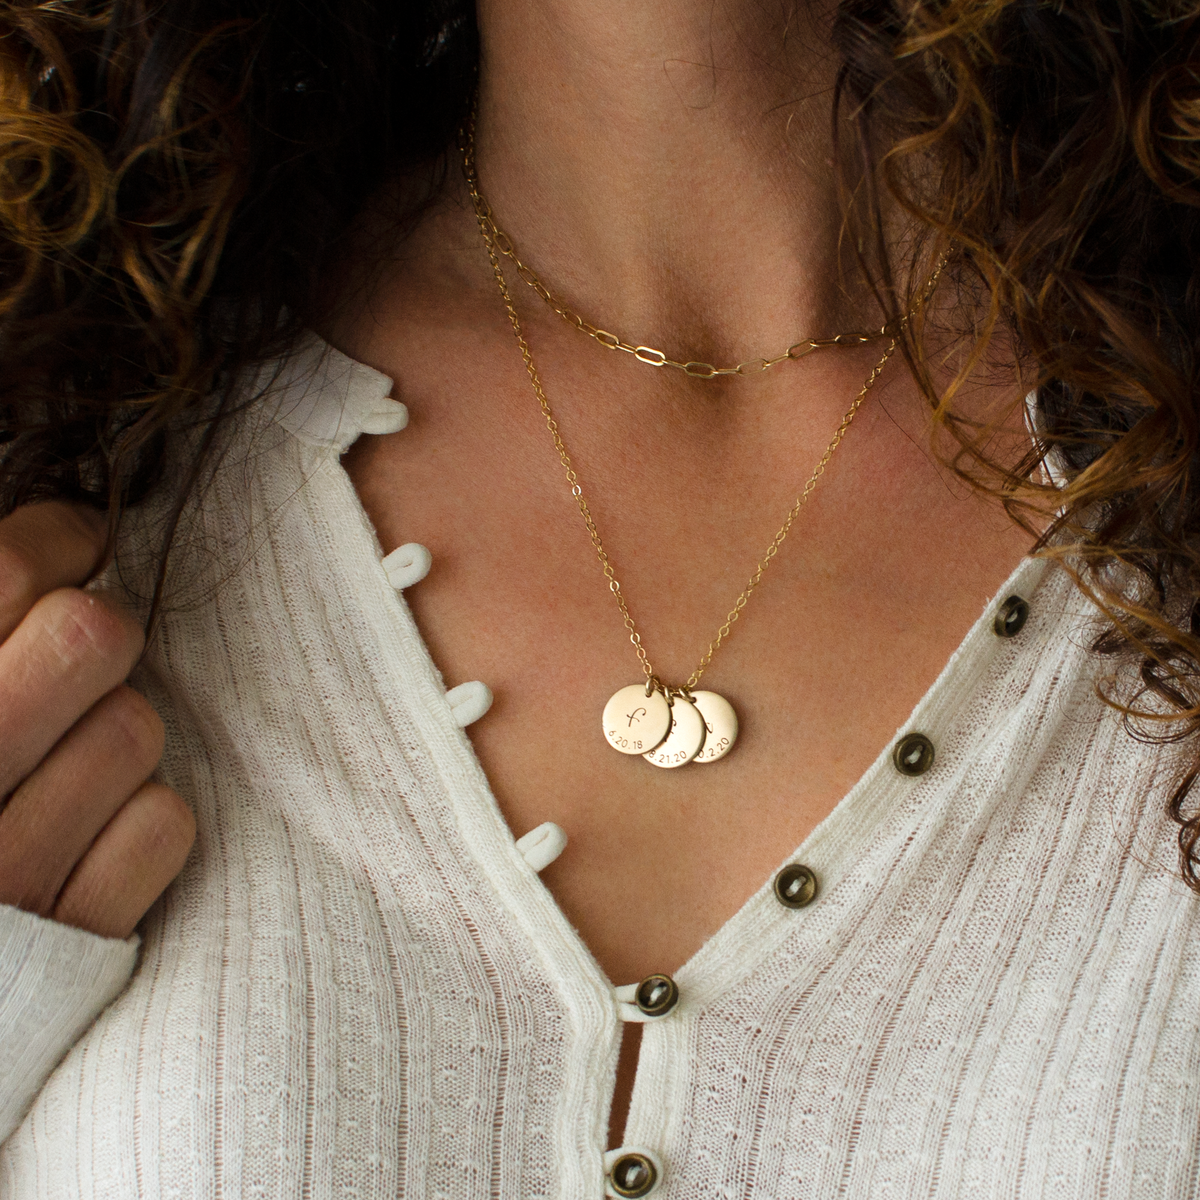 Anniversary Disc Necklace